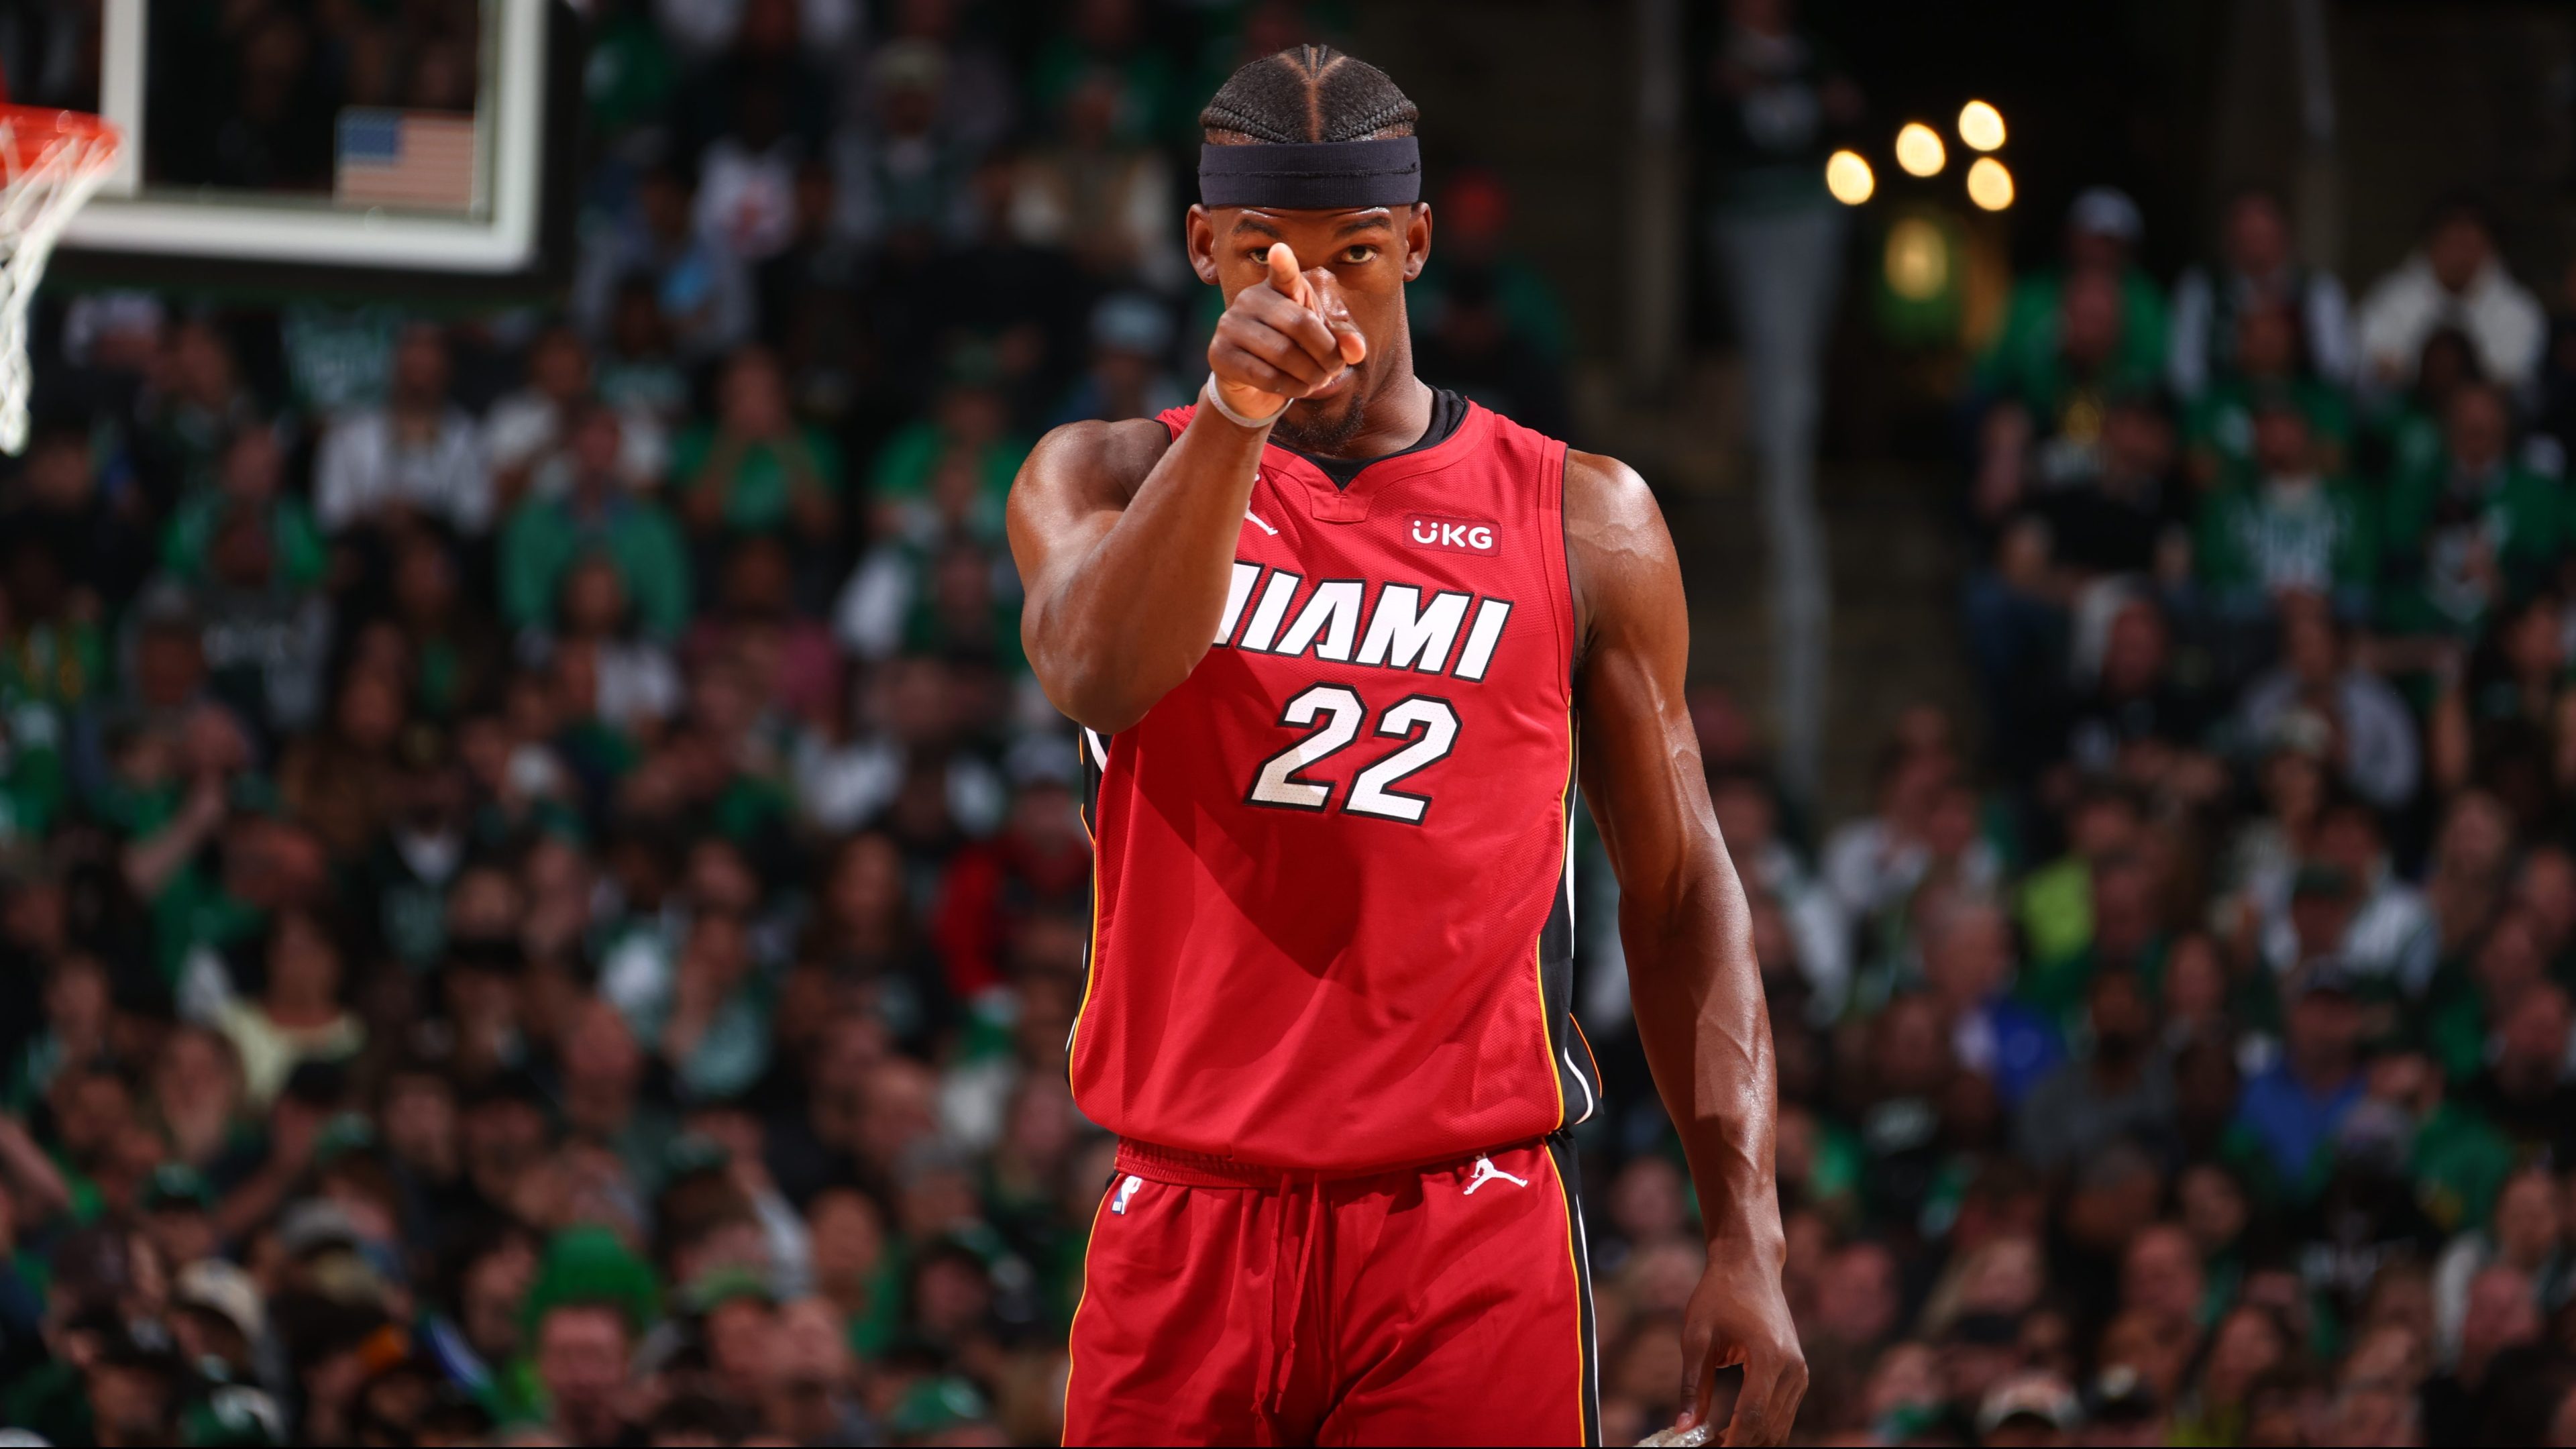 Jimmy Butler #22 of the Miami Heat looks on during Round 3 Game 1 of the Eastern Conference Finals 2023 NBA Playoffs against the Boston Celtics on May 17, 2023 at the TD Garden in Boston, Massachusetts.